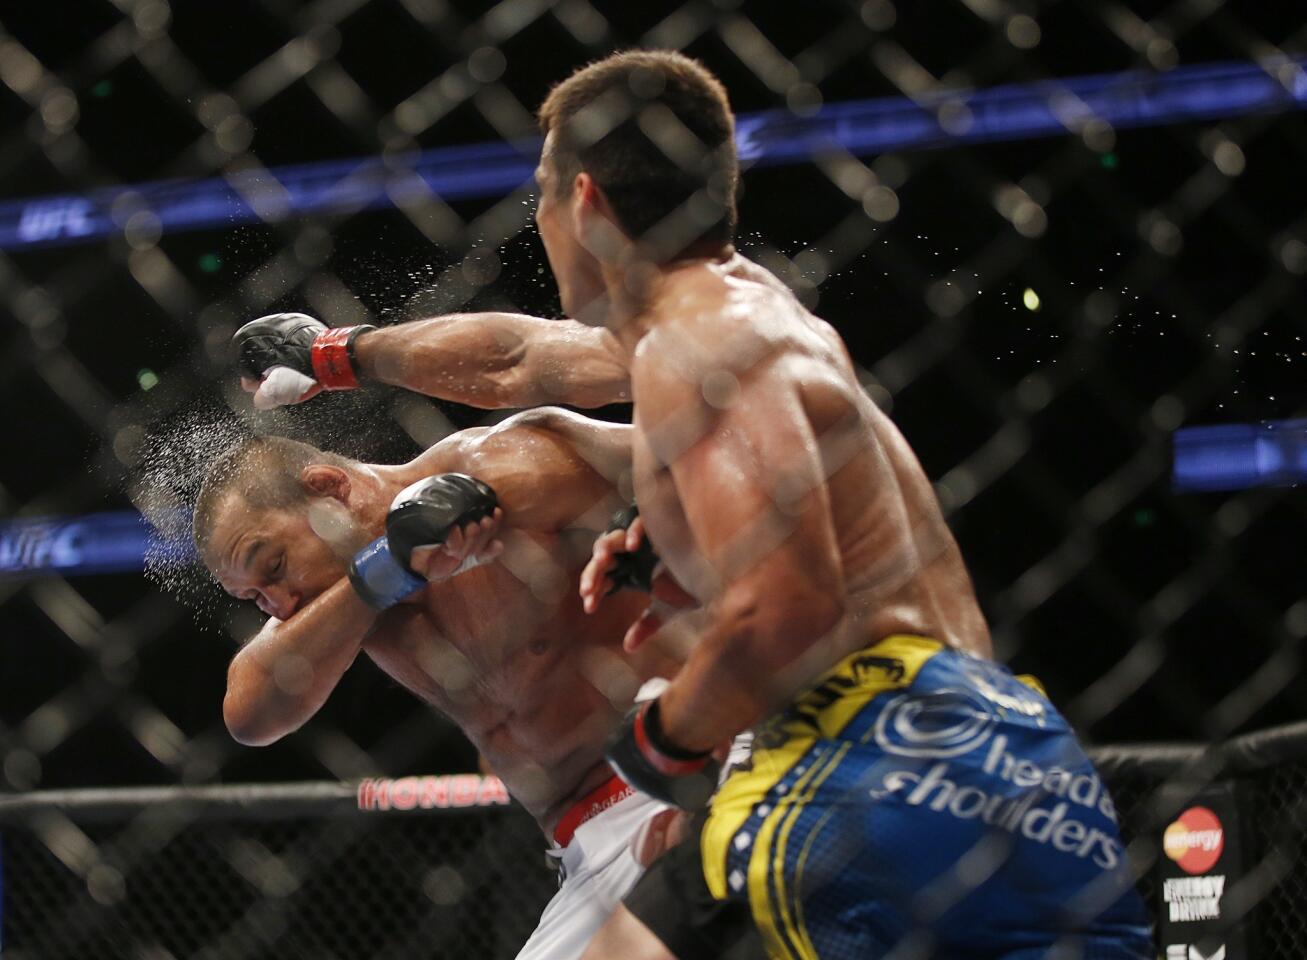 Lyoto Machida lands a punch against Dan Henderson during their light-heavyweight fight at UFC 157 on Saturday night at the Honda Center in Anaheim.